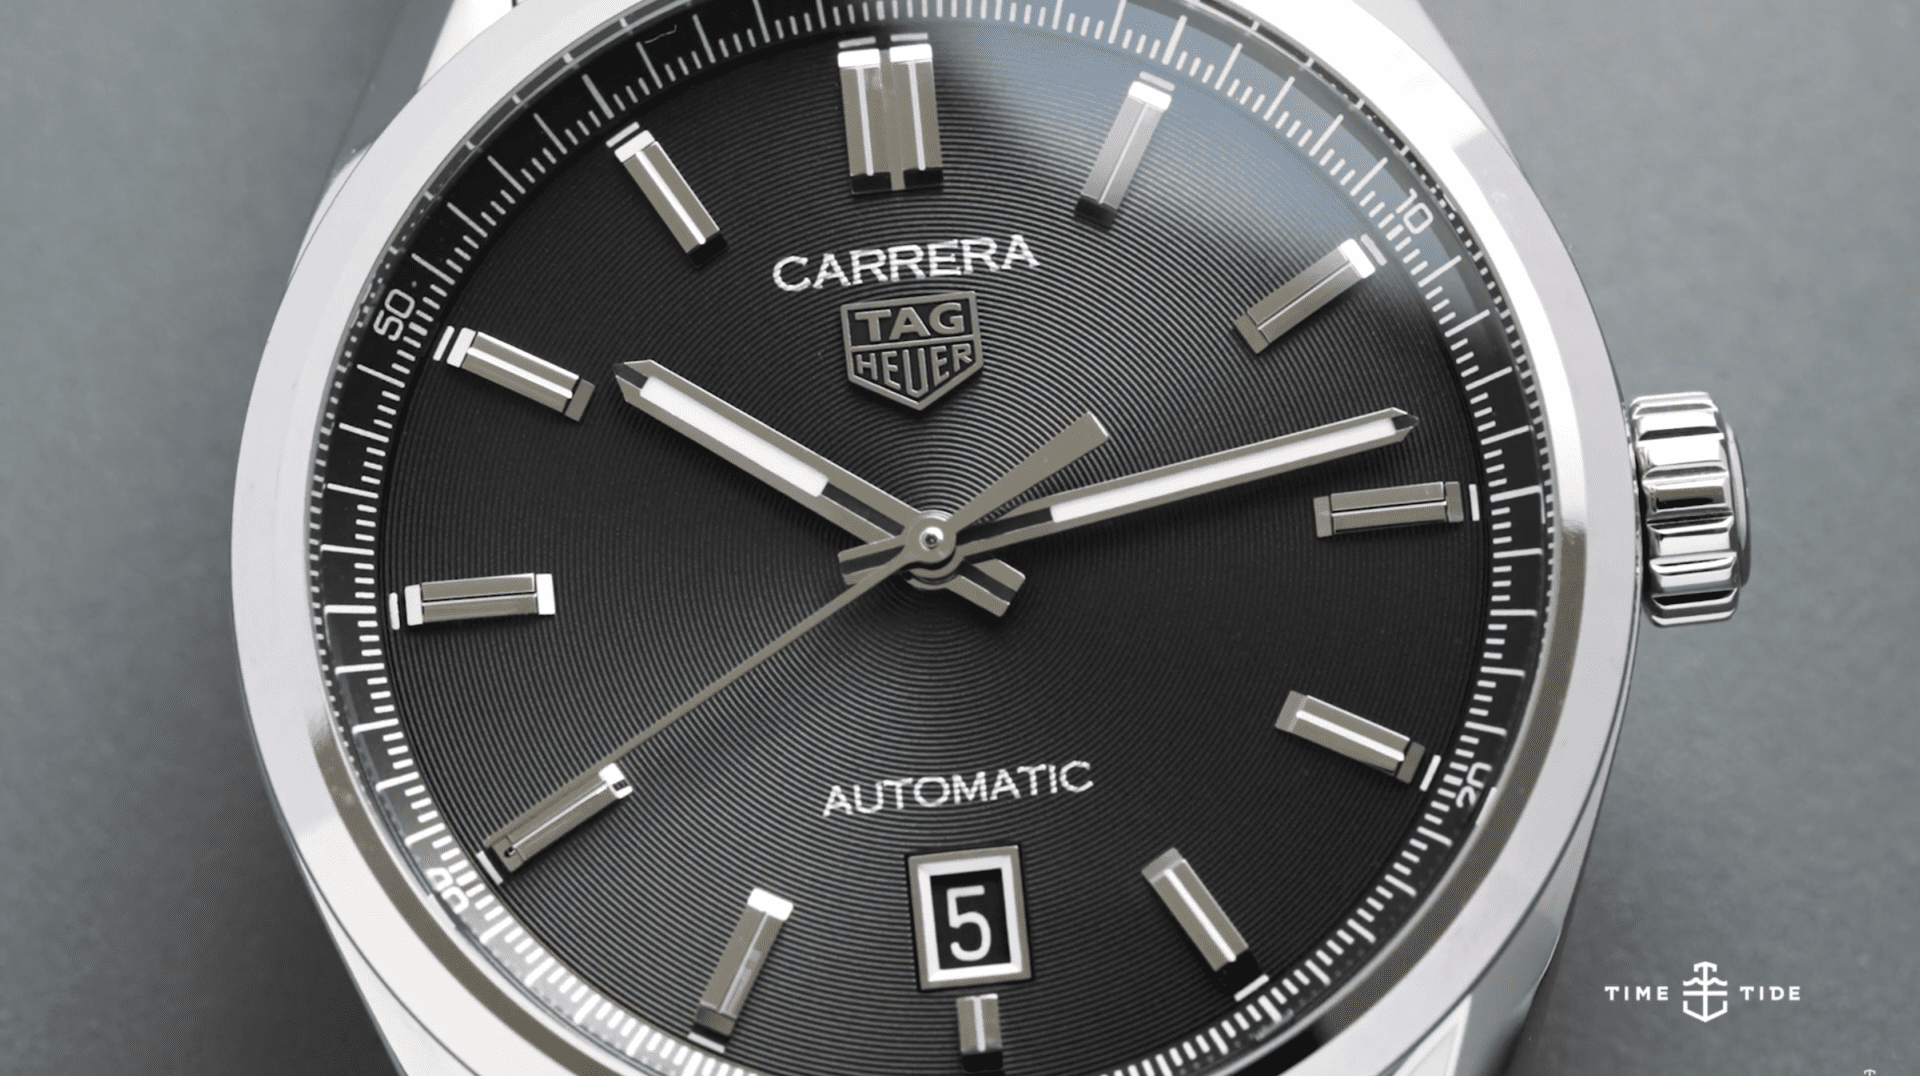 HANDS-ON: the TAG Heuer Carrera Three Hands Collection